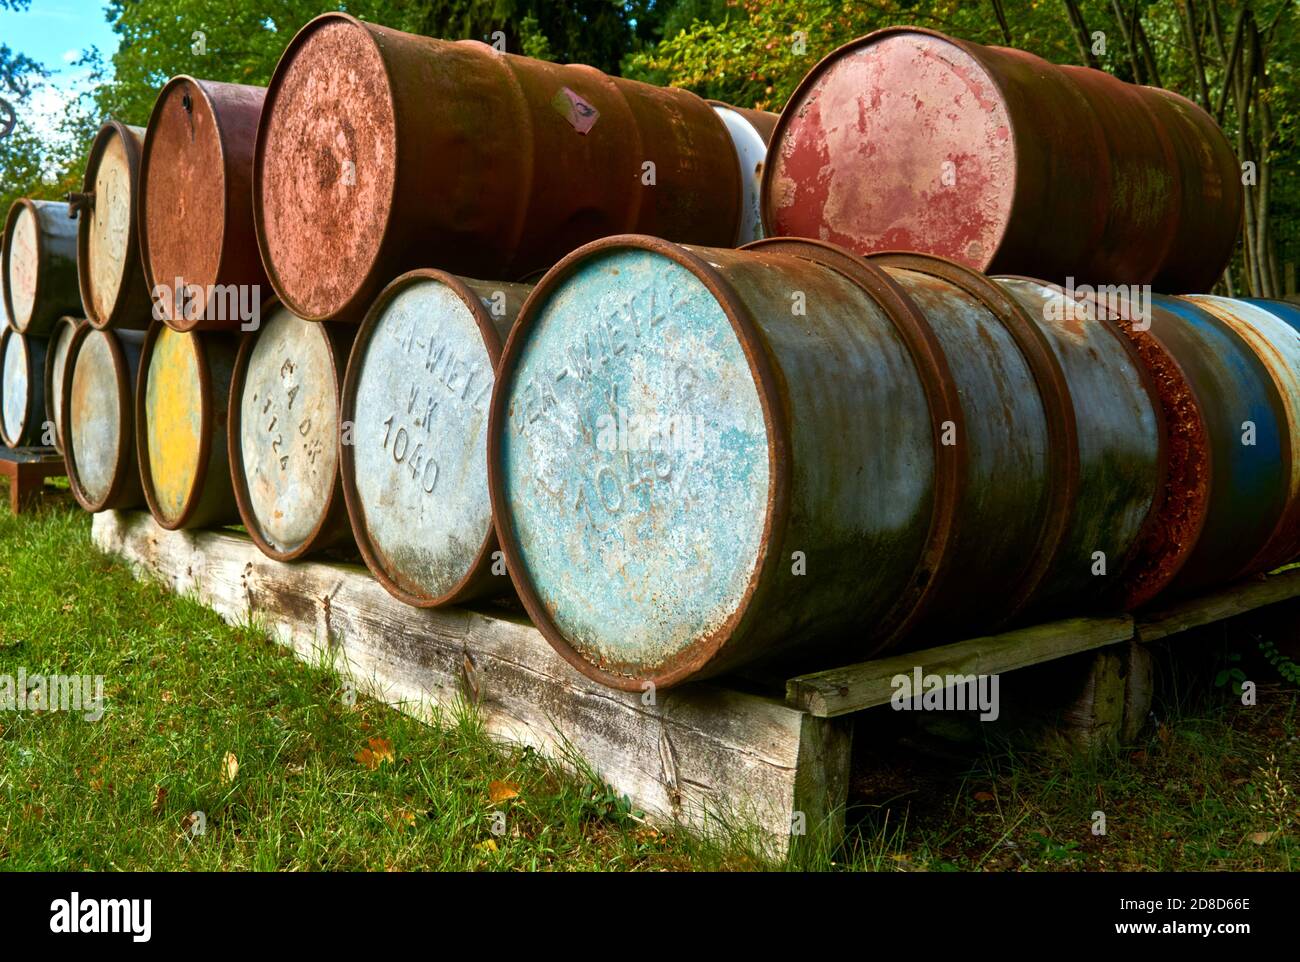 Wietze, Germany, September 10., 2020: Old empty oil barrels on a solid wood Euro pallet Stock Photo